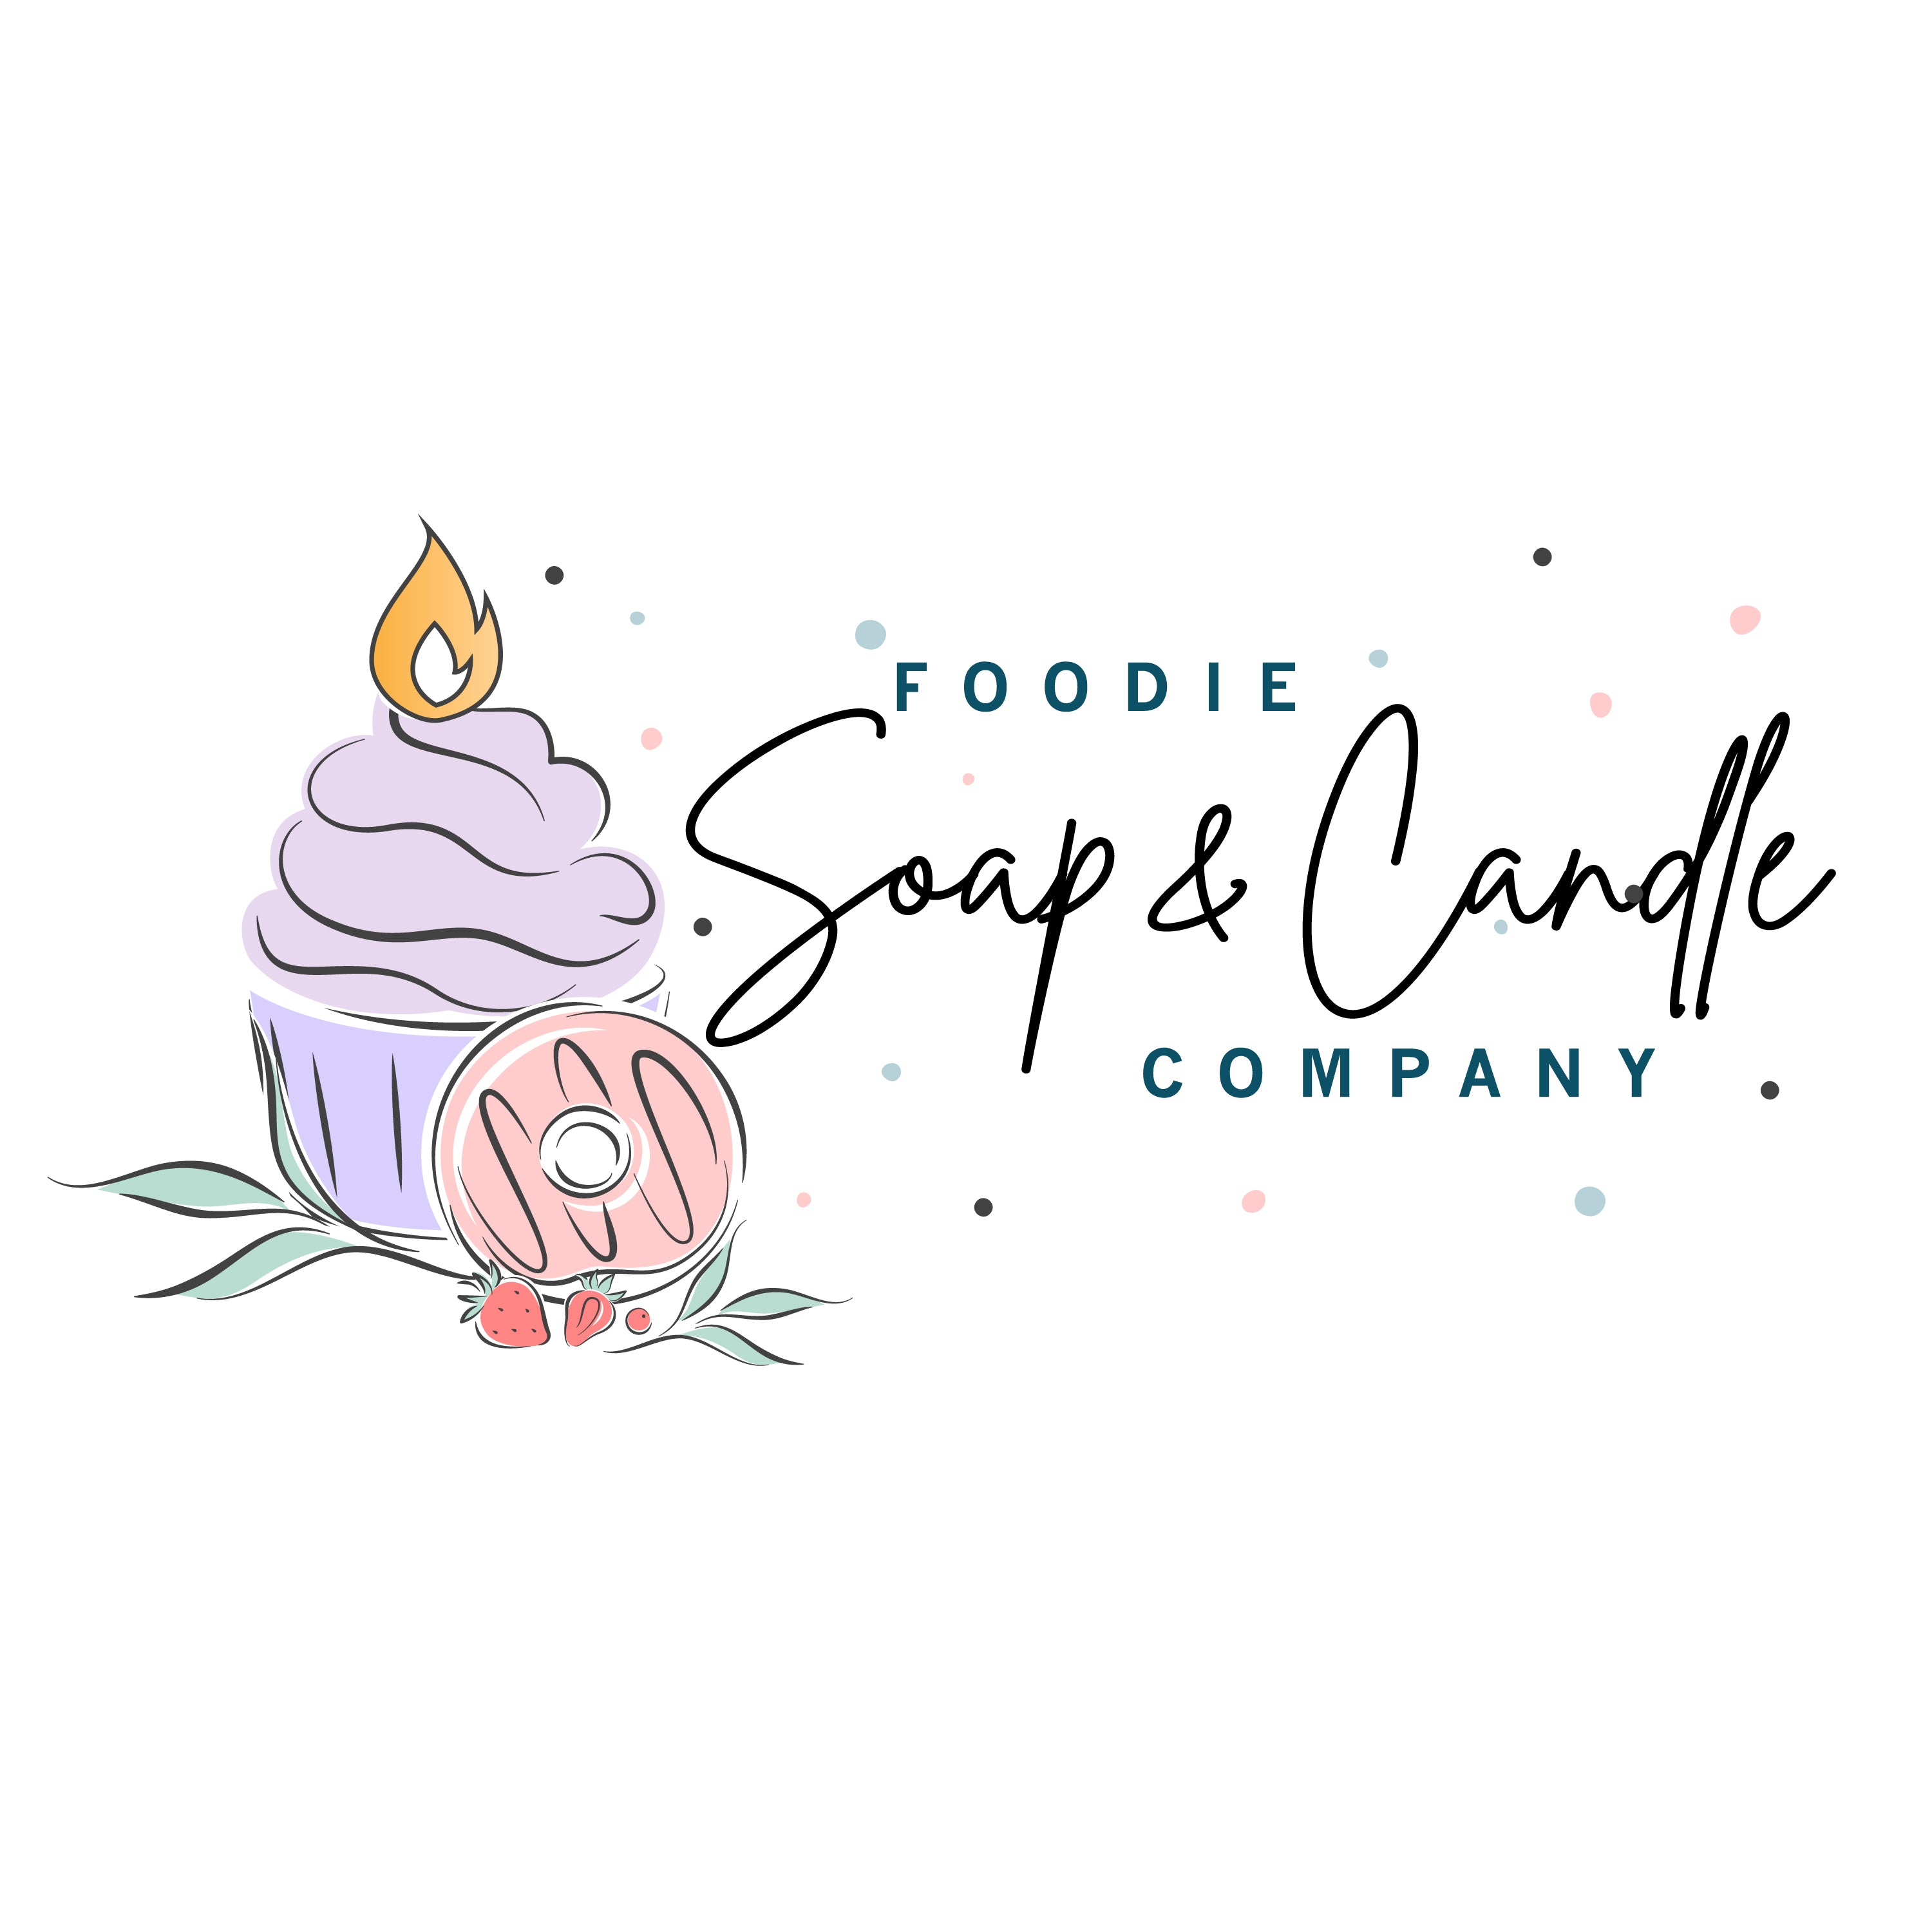 Foodie Soap & Candle Company